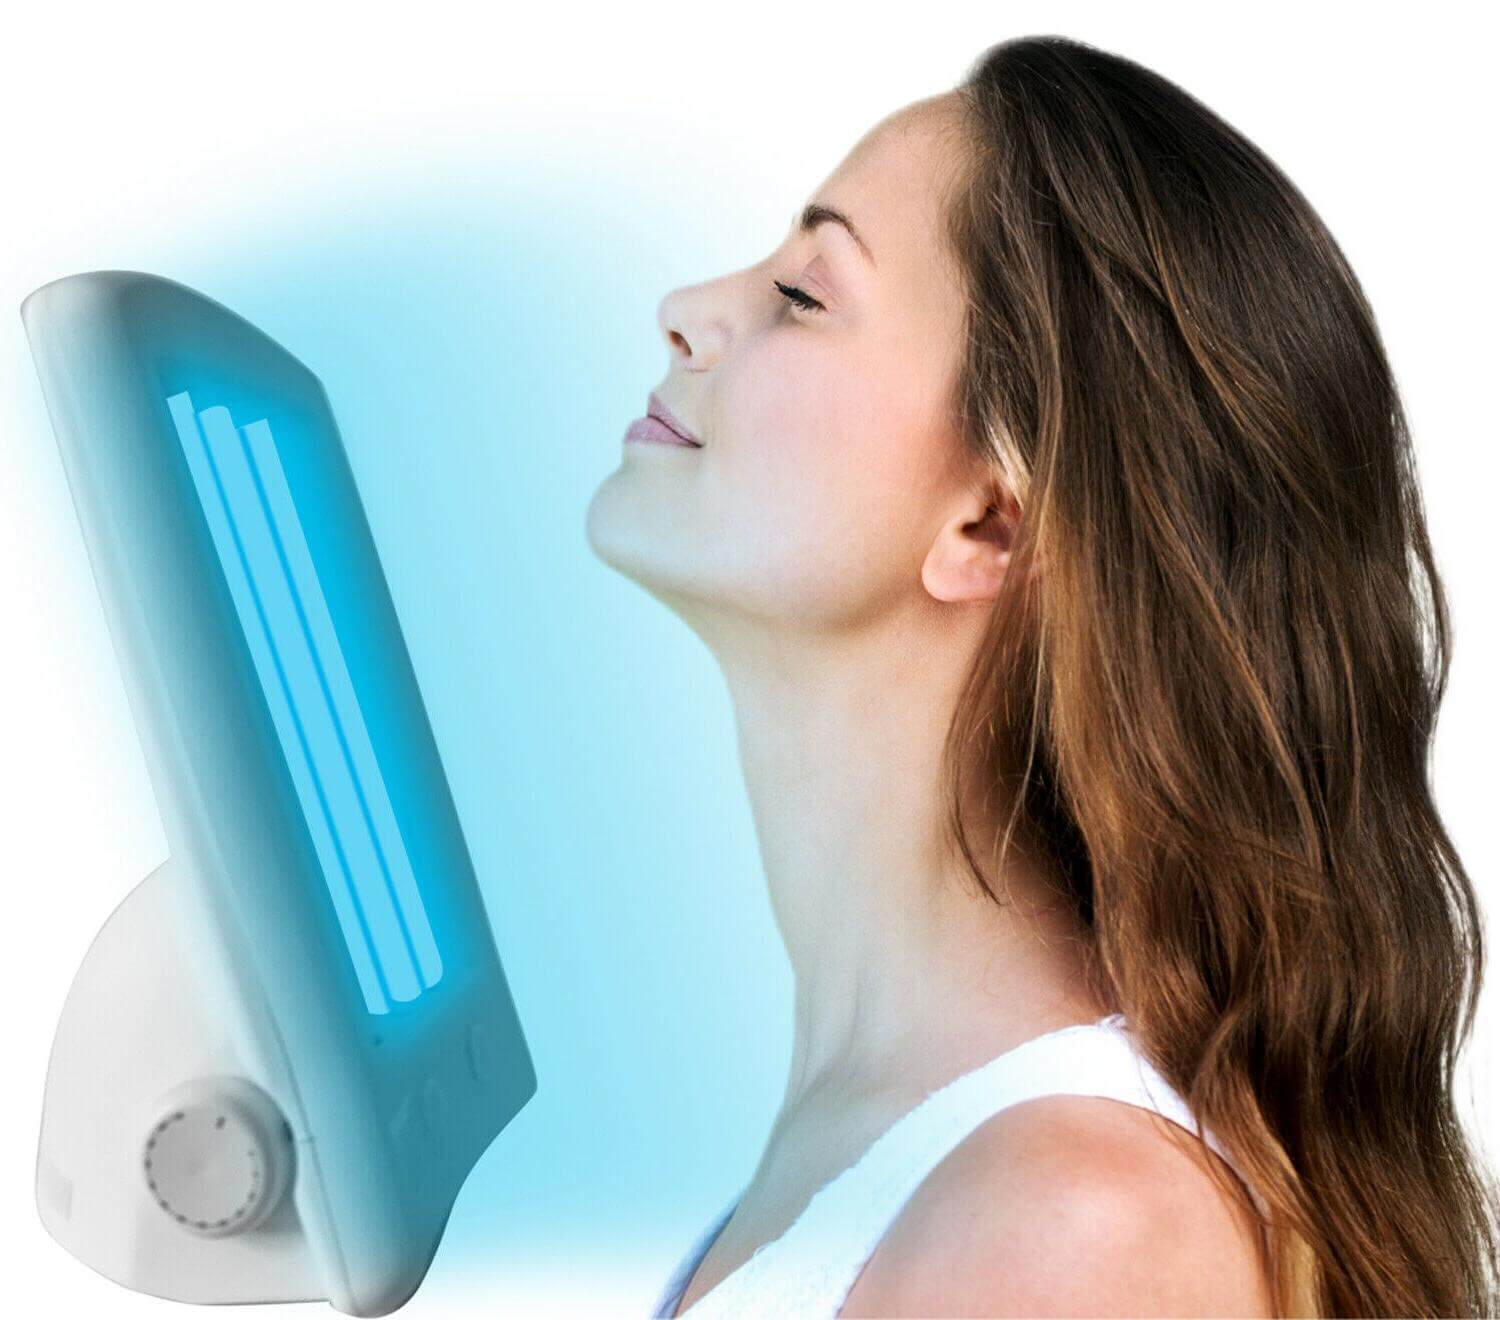 facial tanning lamps to boost vitamin d